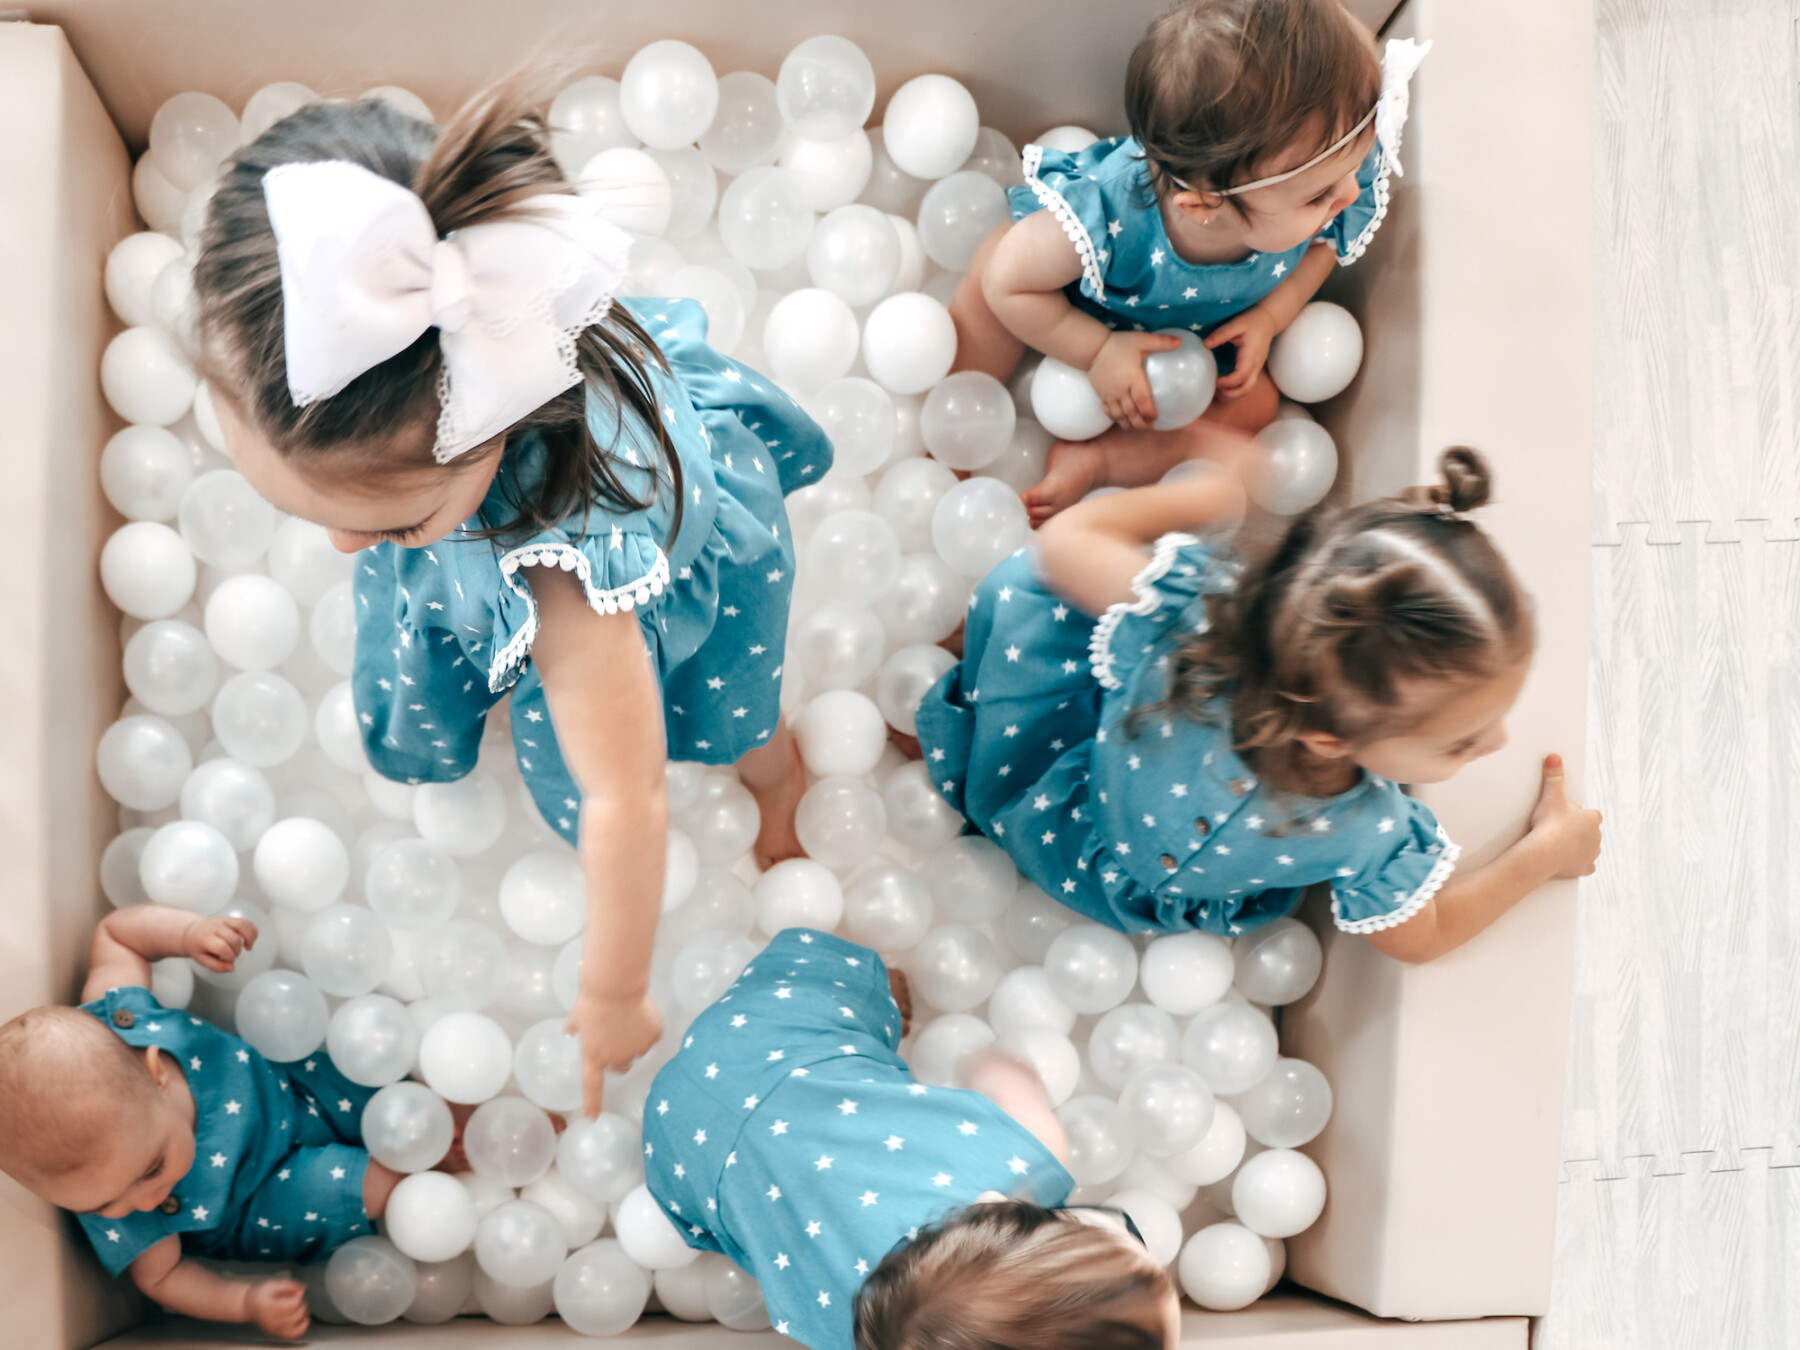 Tots Aloud Soft Play Party Rental